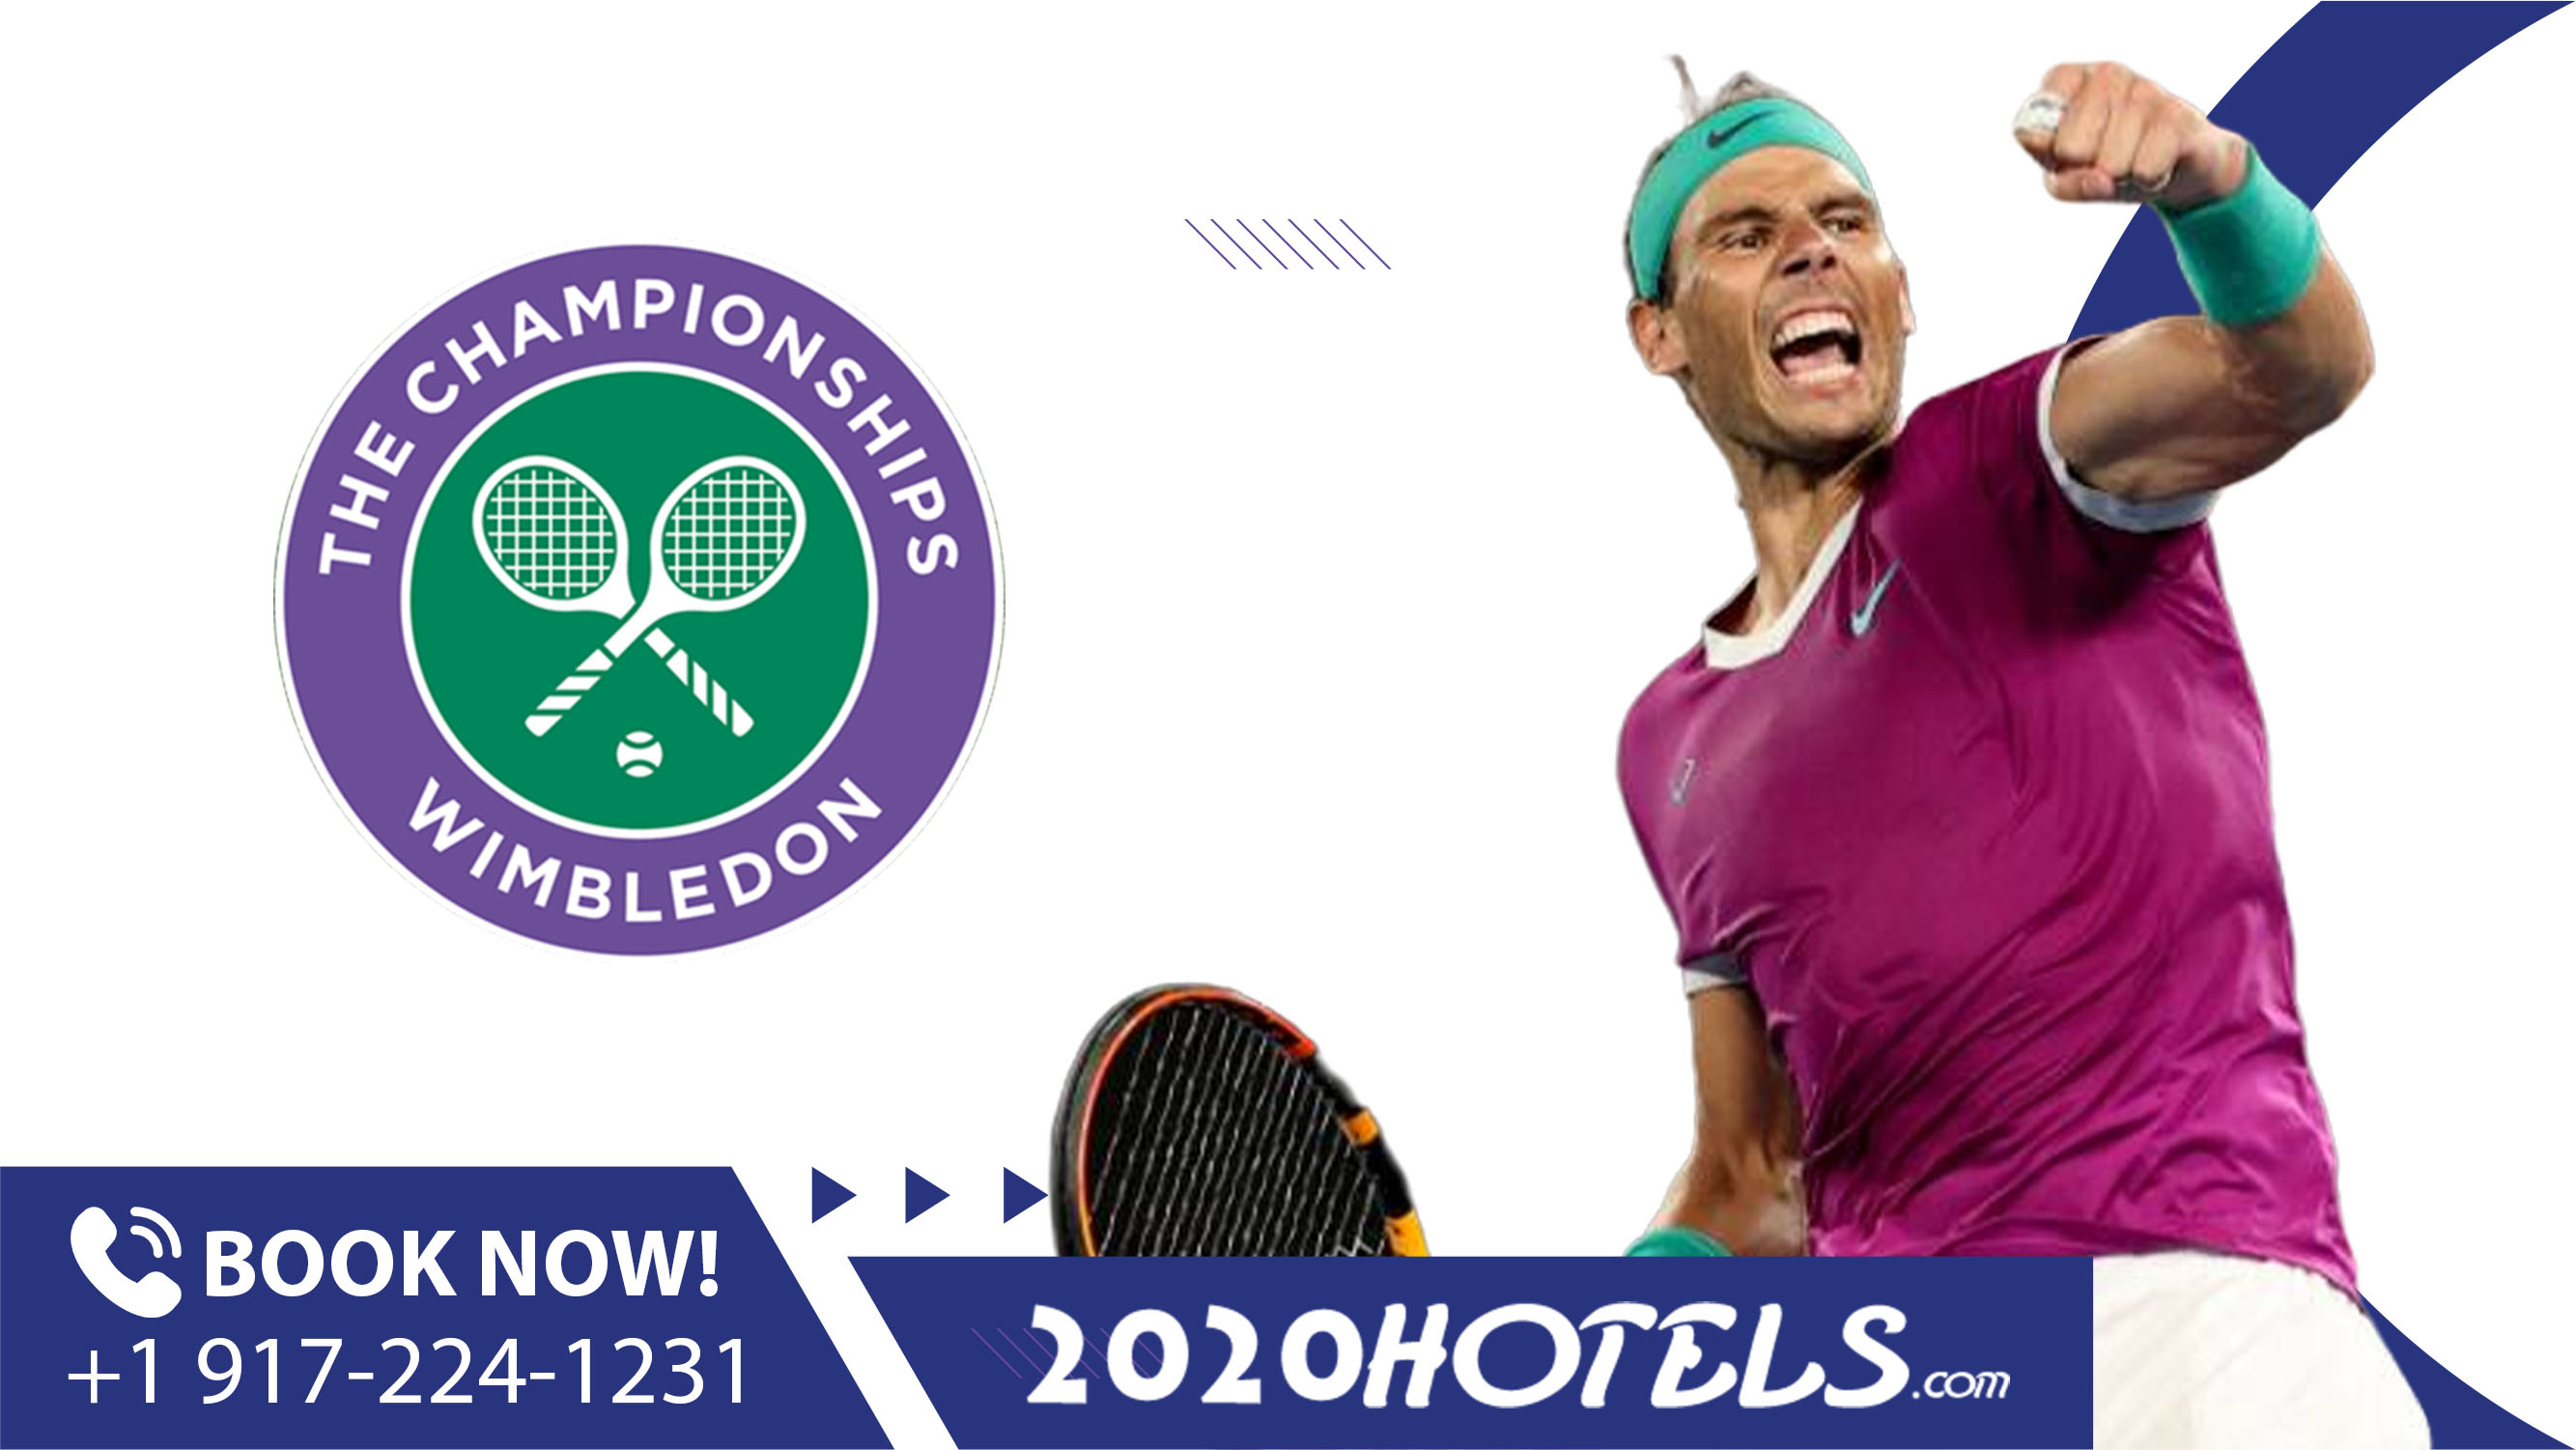 Book now WimbledonChampionships Hotels, last minute deals on hotels and packages only @ 2020hotels.com click here to book!